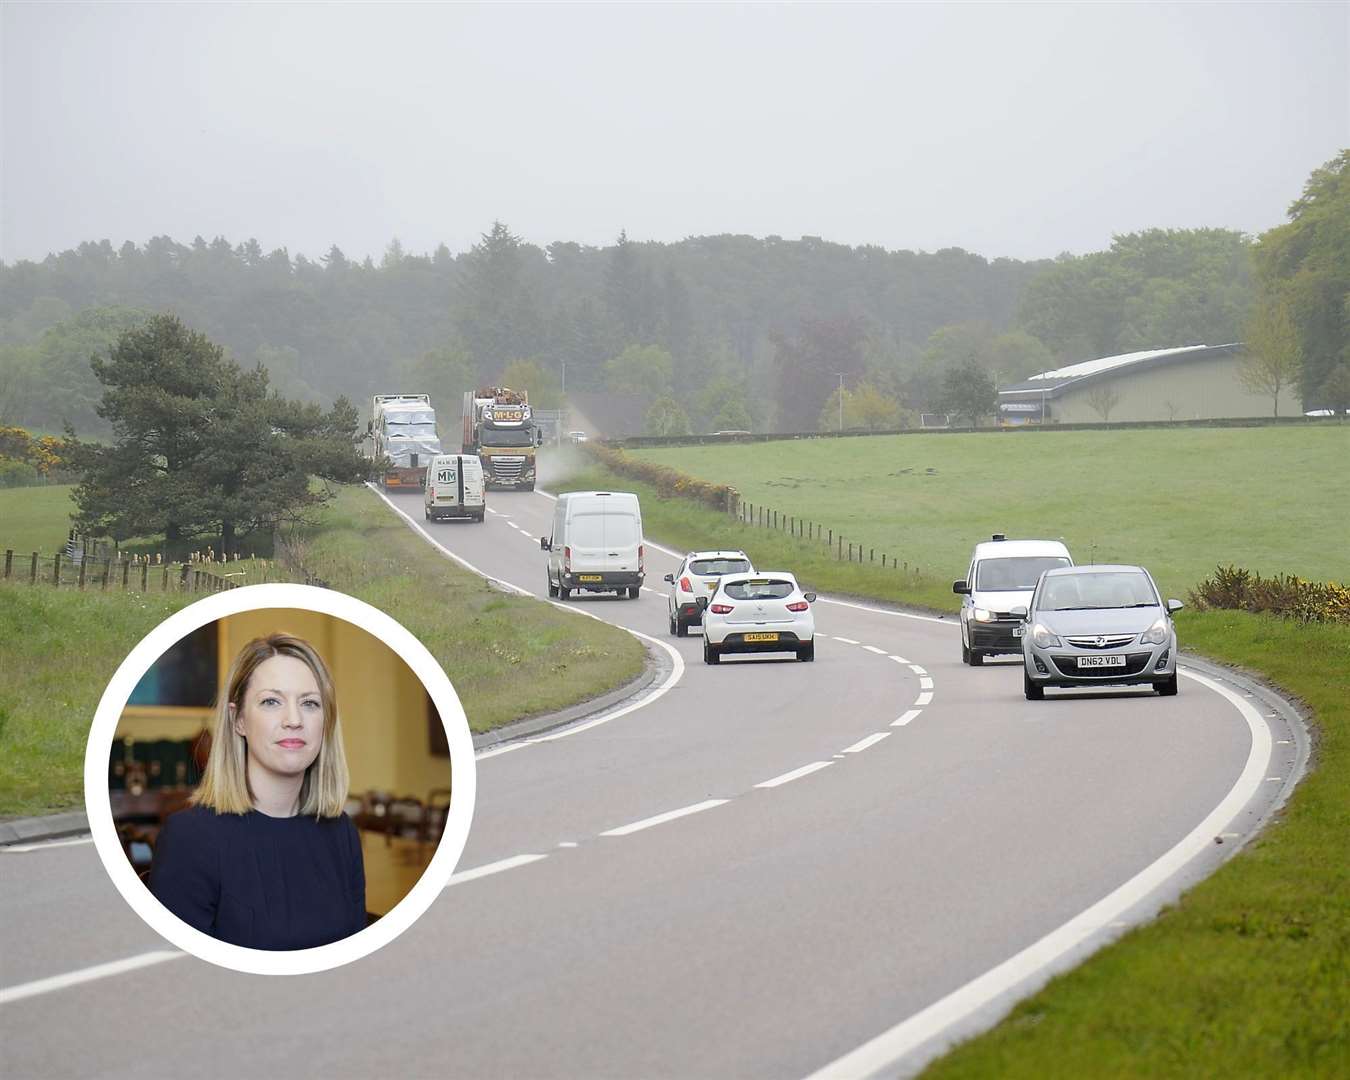 Transport Minister jenny Gilruth told MSPs that the Scottish Government remains committed to dualling the A96.